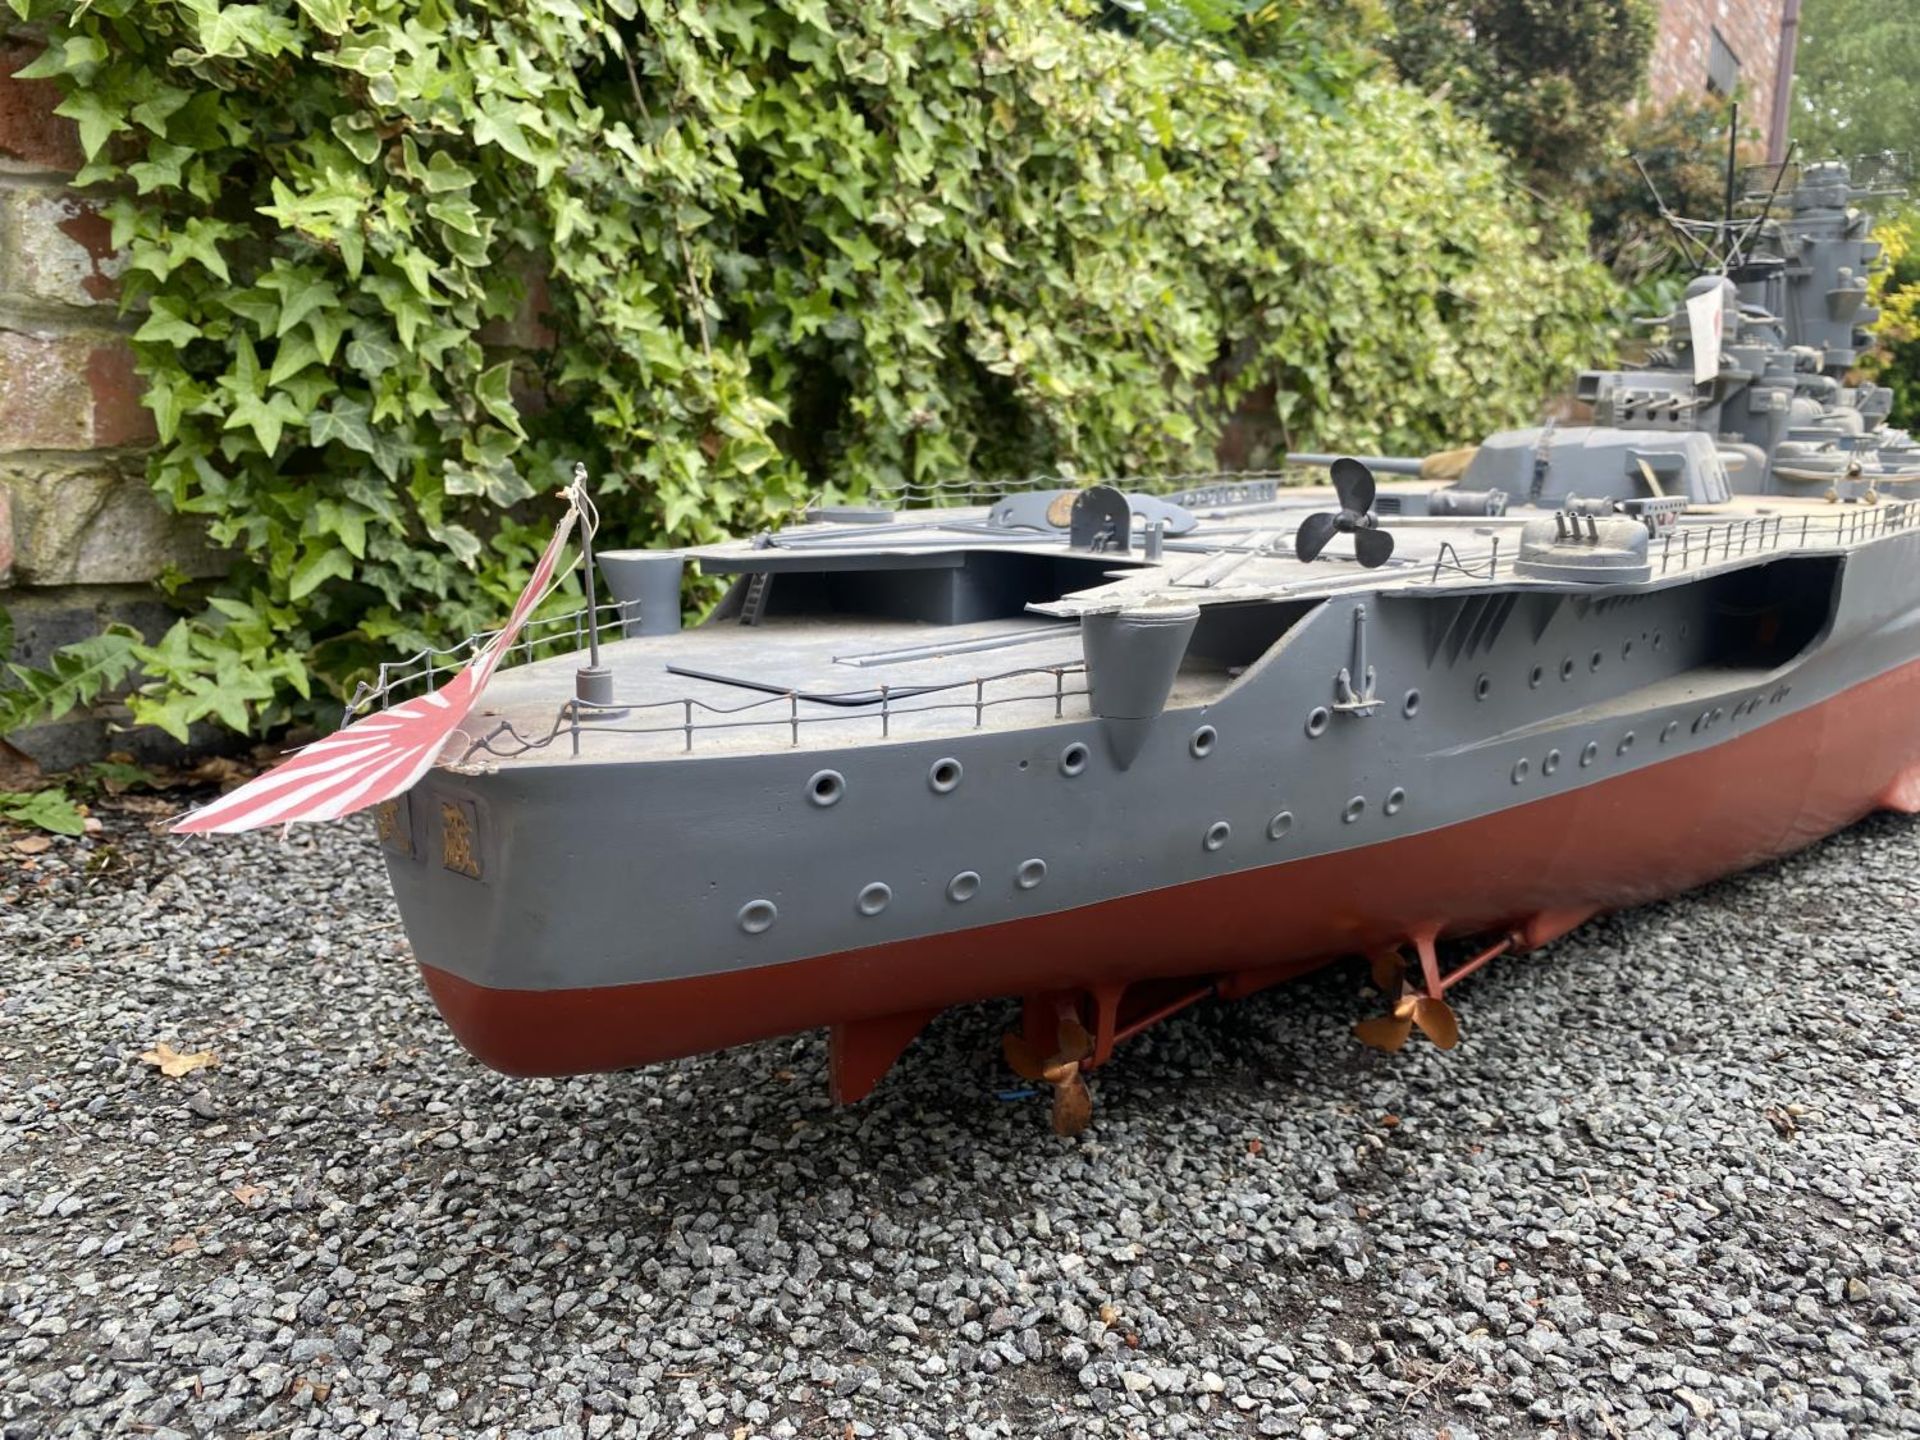 A VERY LARGE MOTORISED REMOTE CONTROLLED MODEL OF WWII JAPANESE MUSASHI / YAMATO WAR SHIP WITH - Image 8 of 42